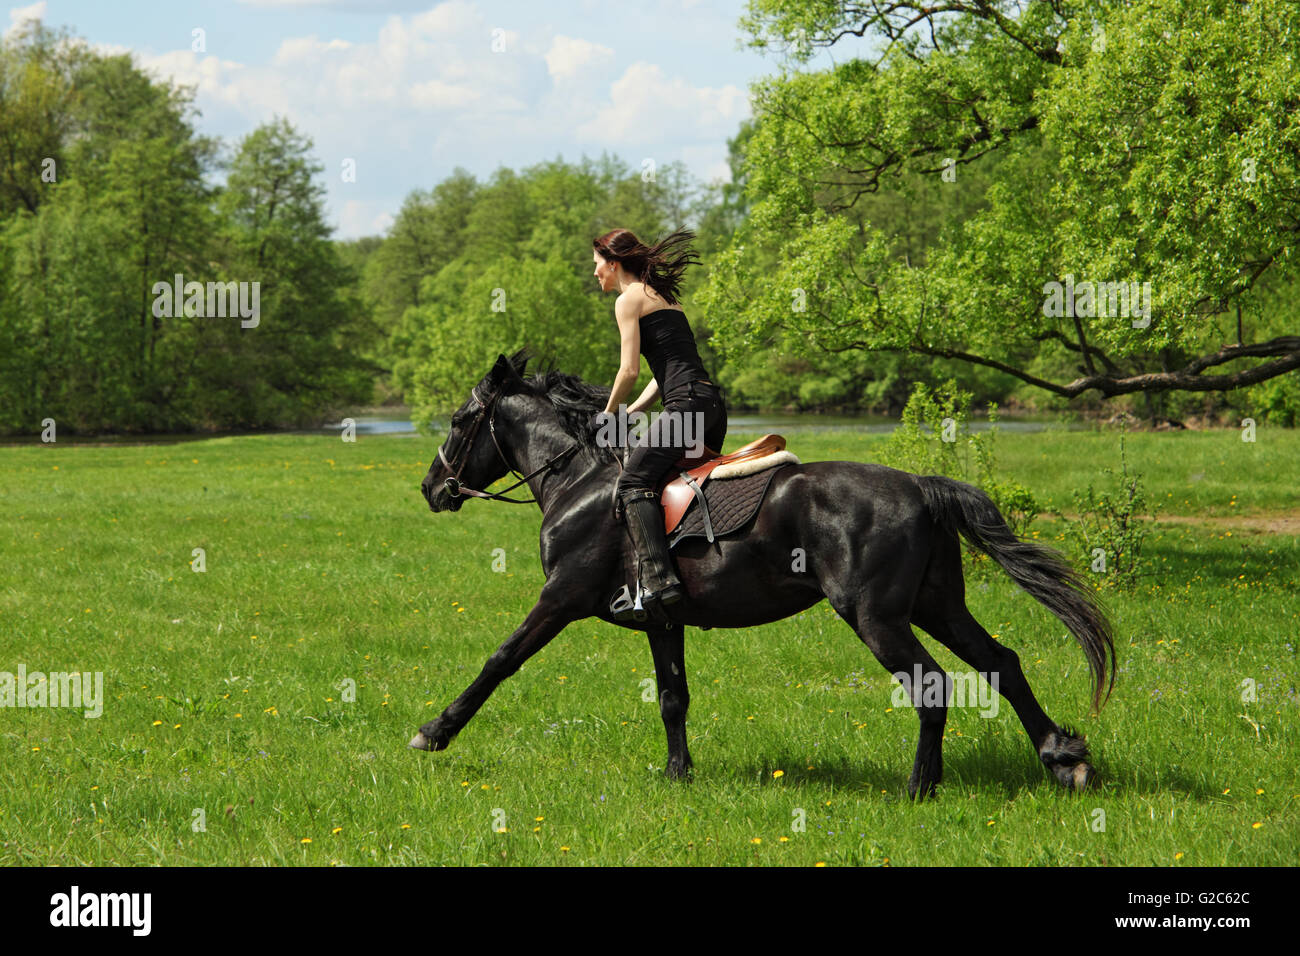 Cheerful cowgirl and her galloping horse Stock Photo